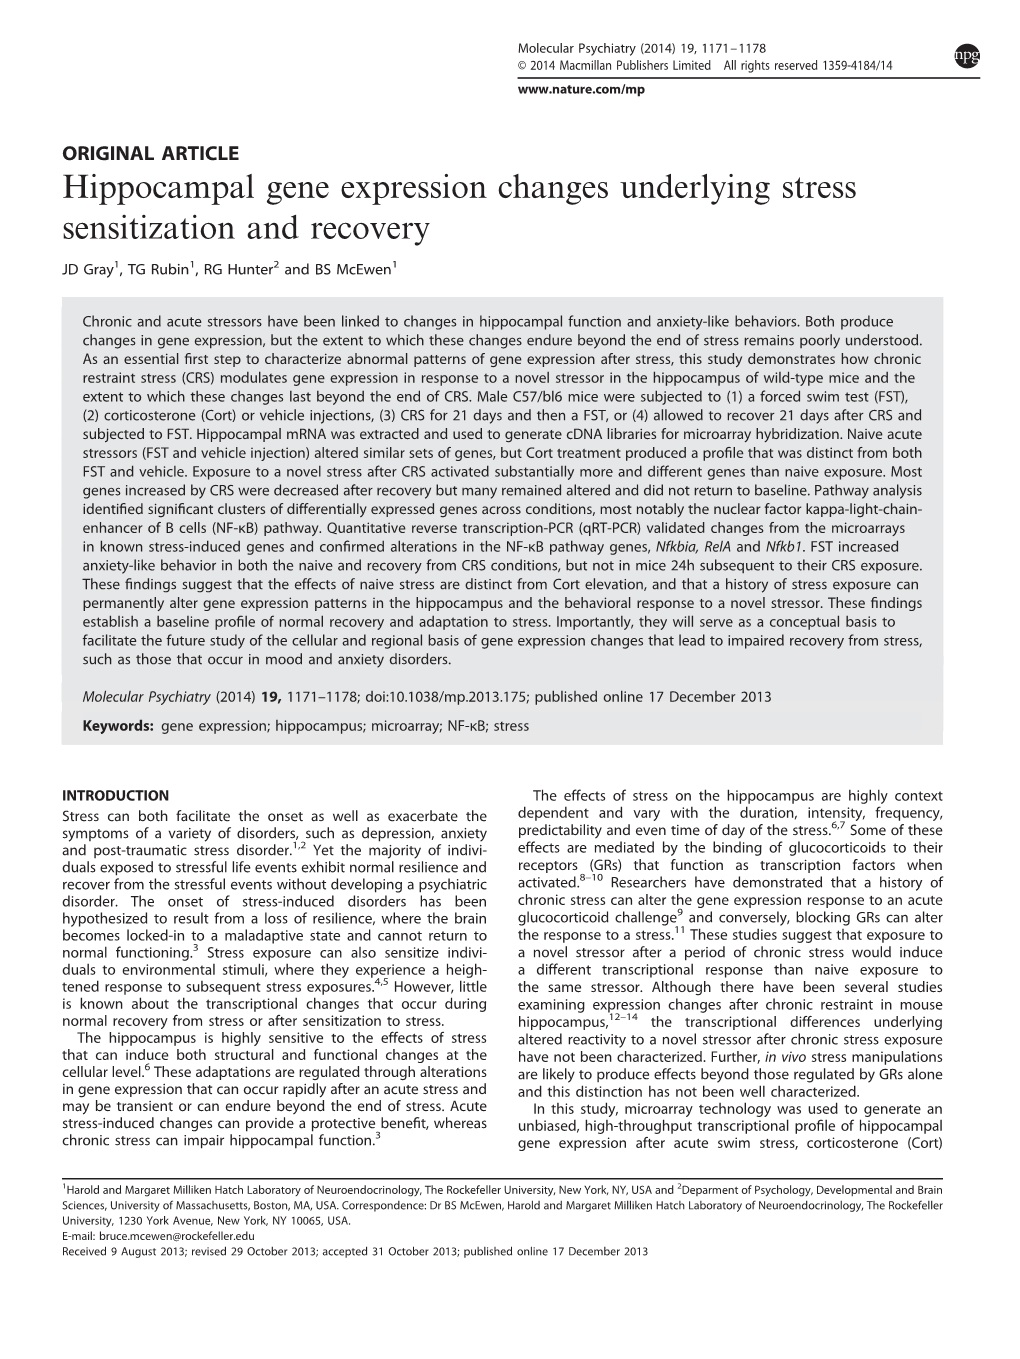 Hippocampal Gene Expression Changes Underlying Stress Sensitization and Recovery